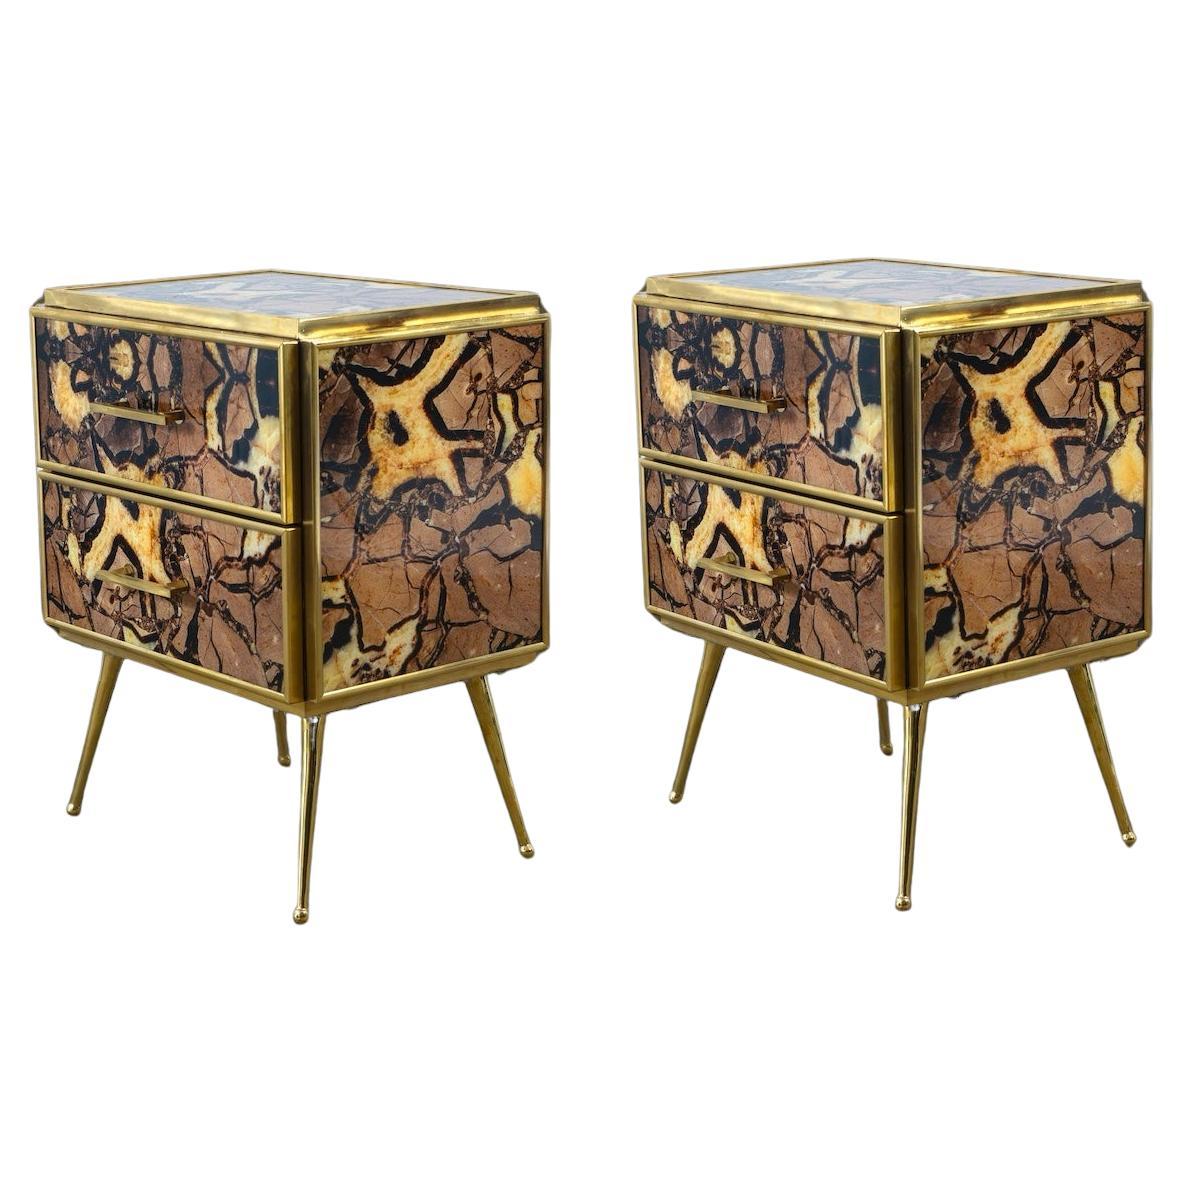 Striking Pair of Mid-Century style Night Stands or Side Tables 